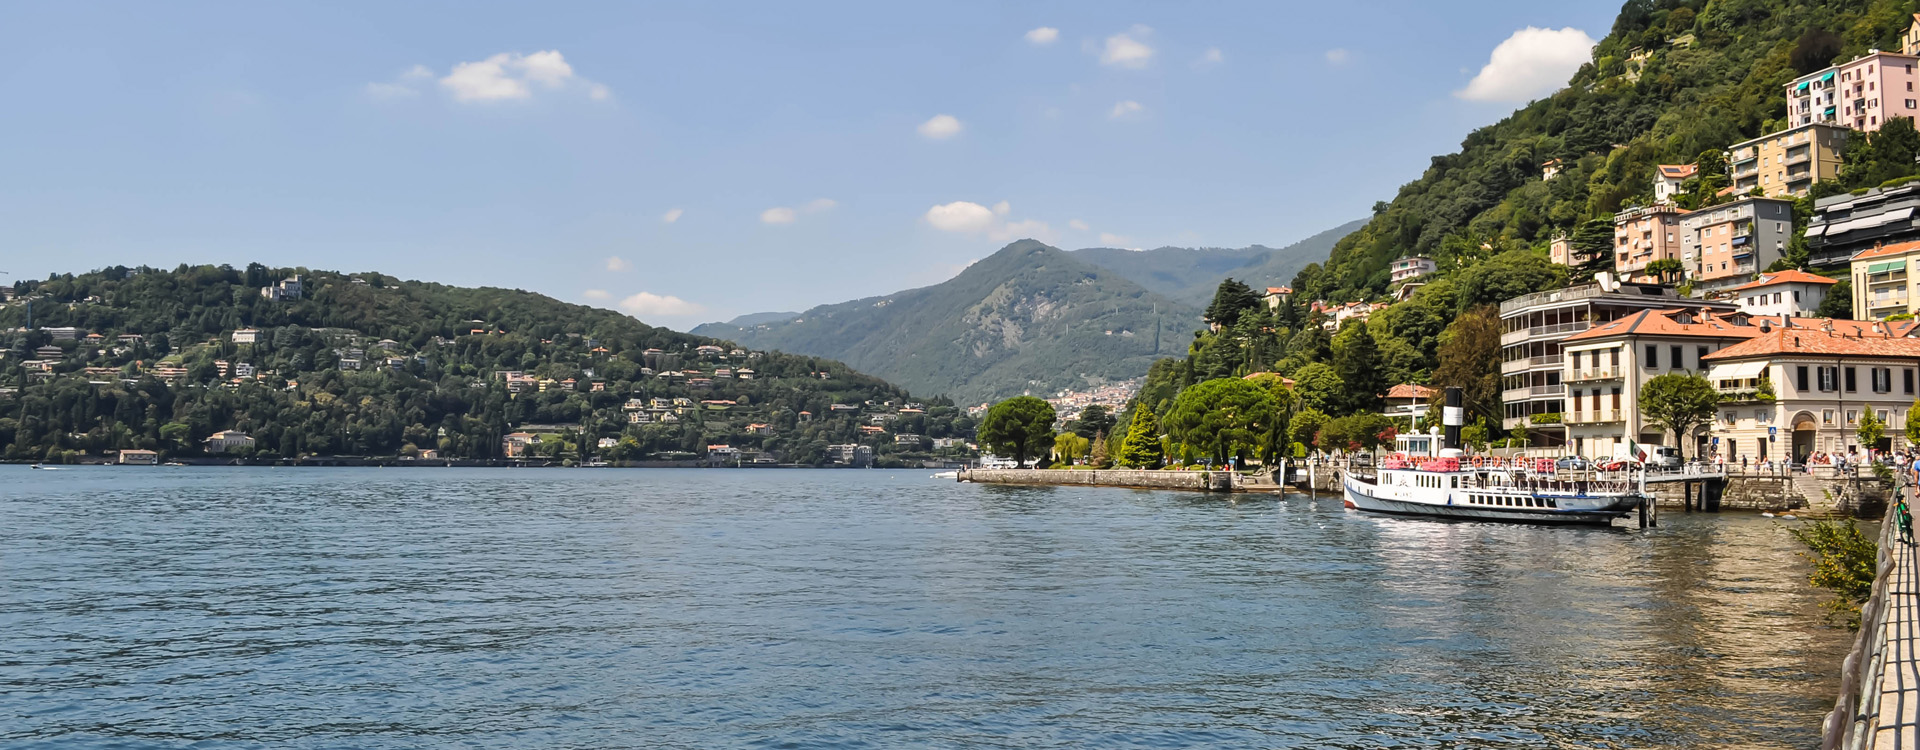 Visiting Como: things to see and do